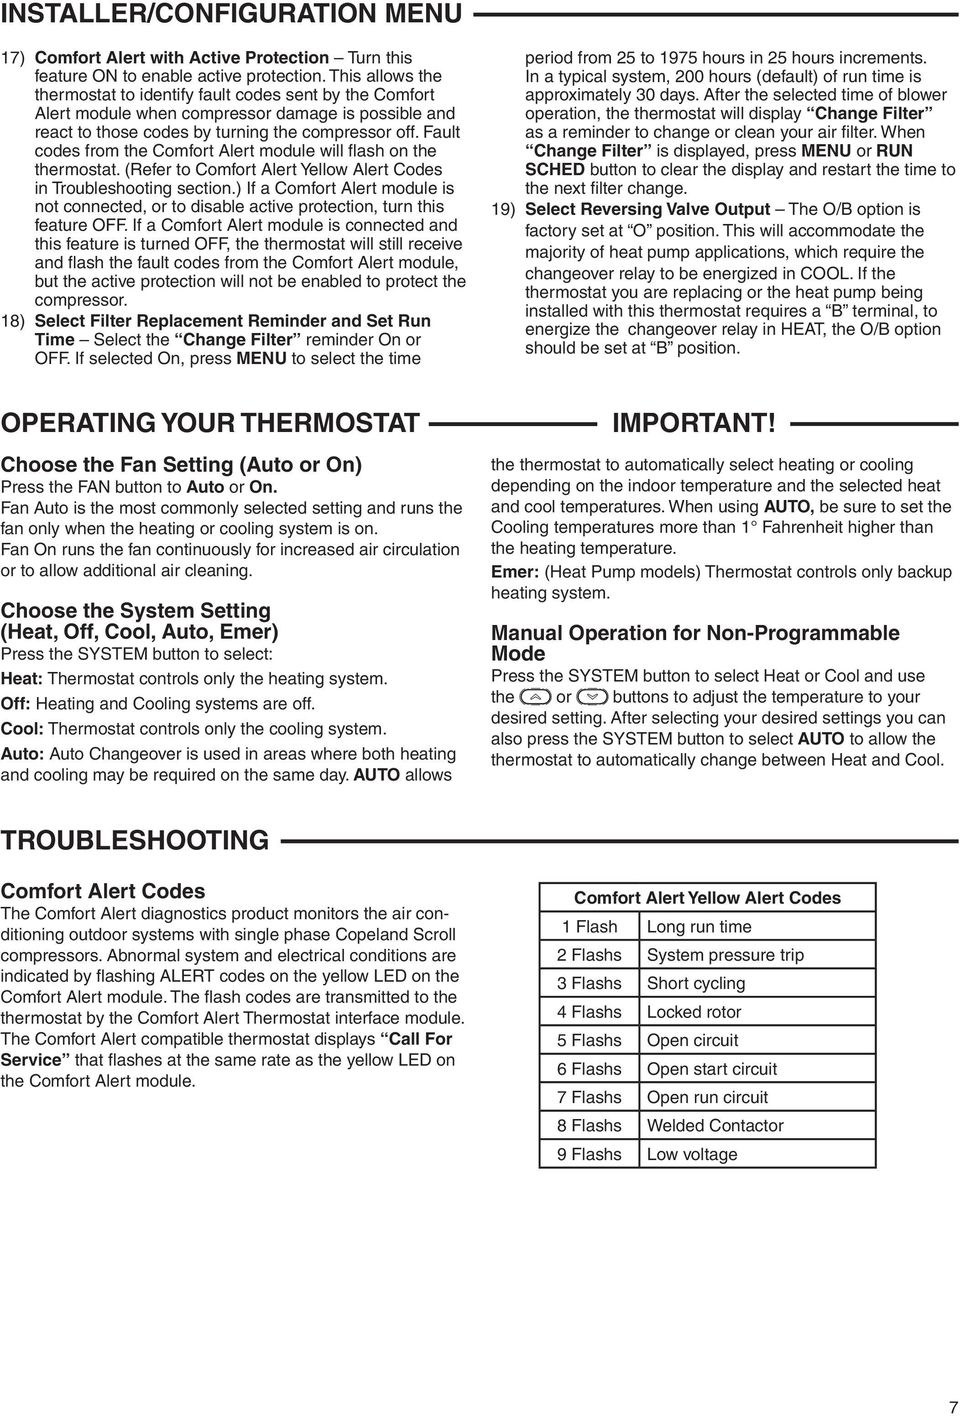 Fault codes from the Comfort Alert module will flash on the thermostat. (Refer to Comfort Alert Yellow Alert Codes in Troubleshooting section.